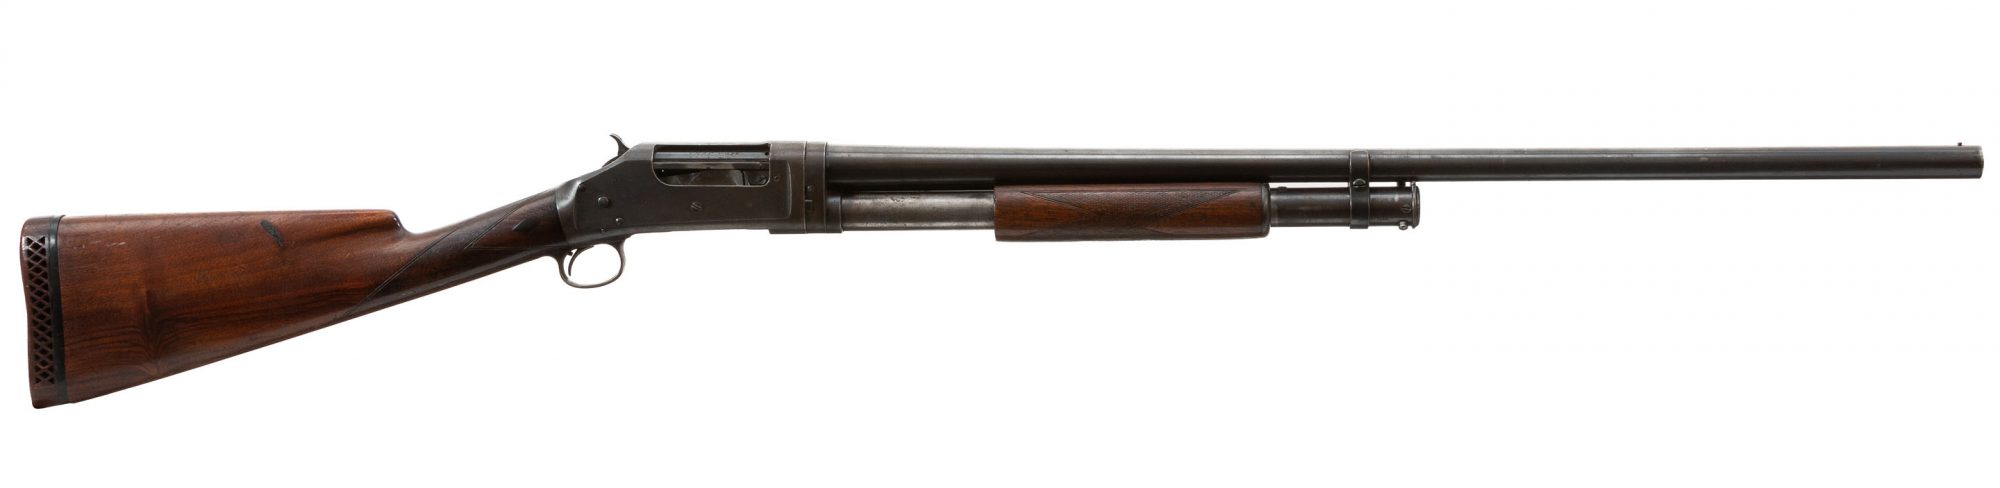 Photo of a pre-owned Winchester Model 1897 shotgun, for sale by Turnbull Restoration of Bloomfield, NY